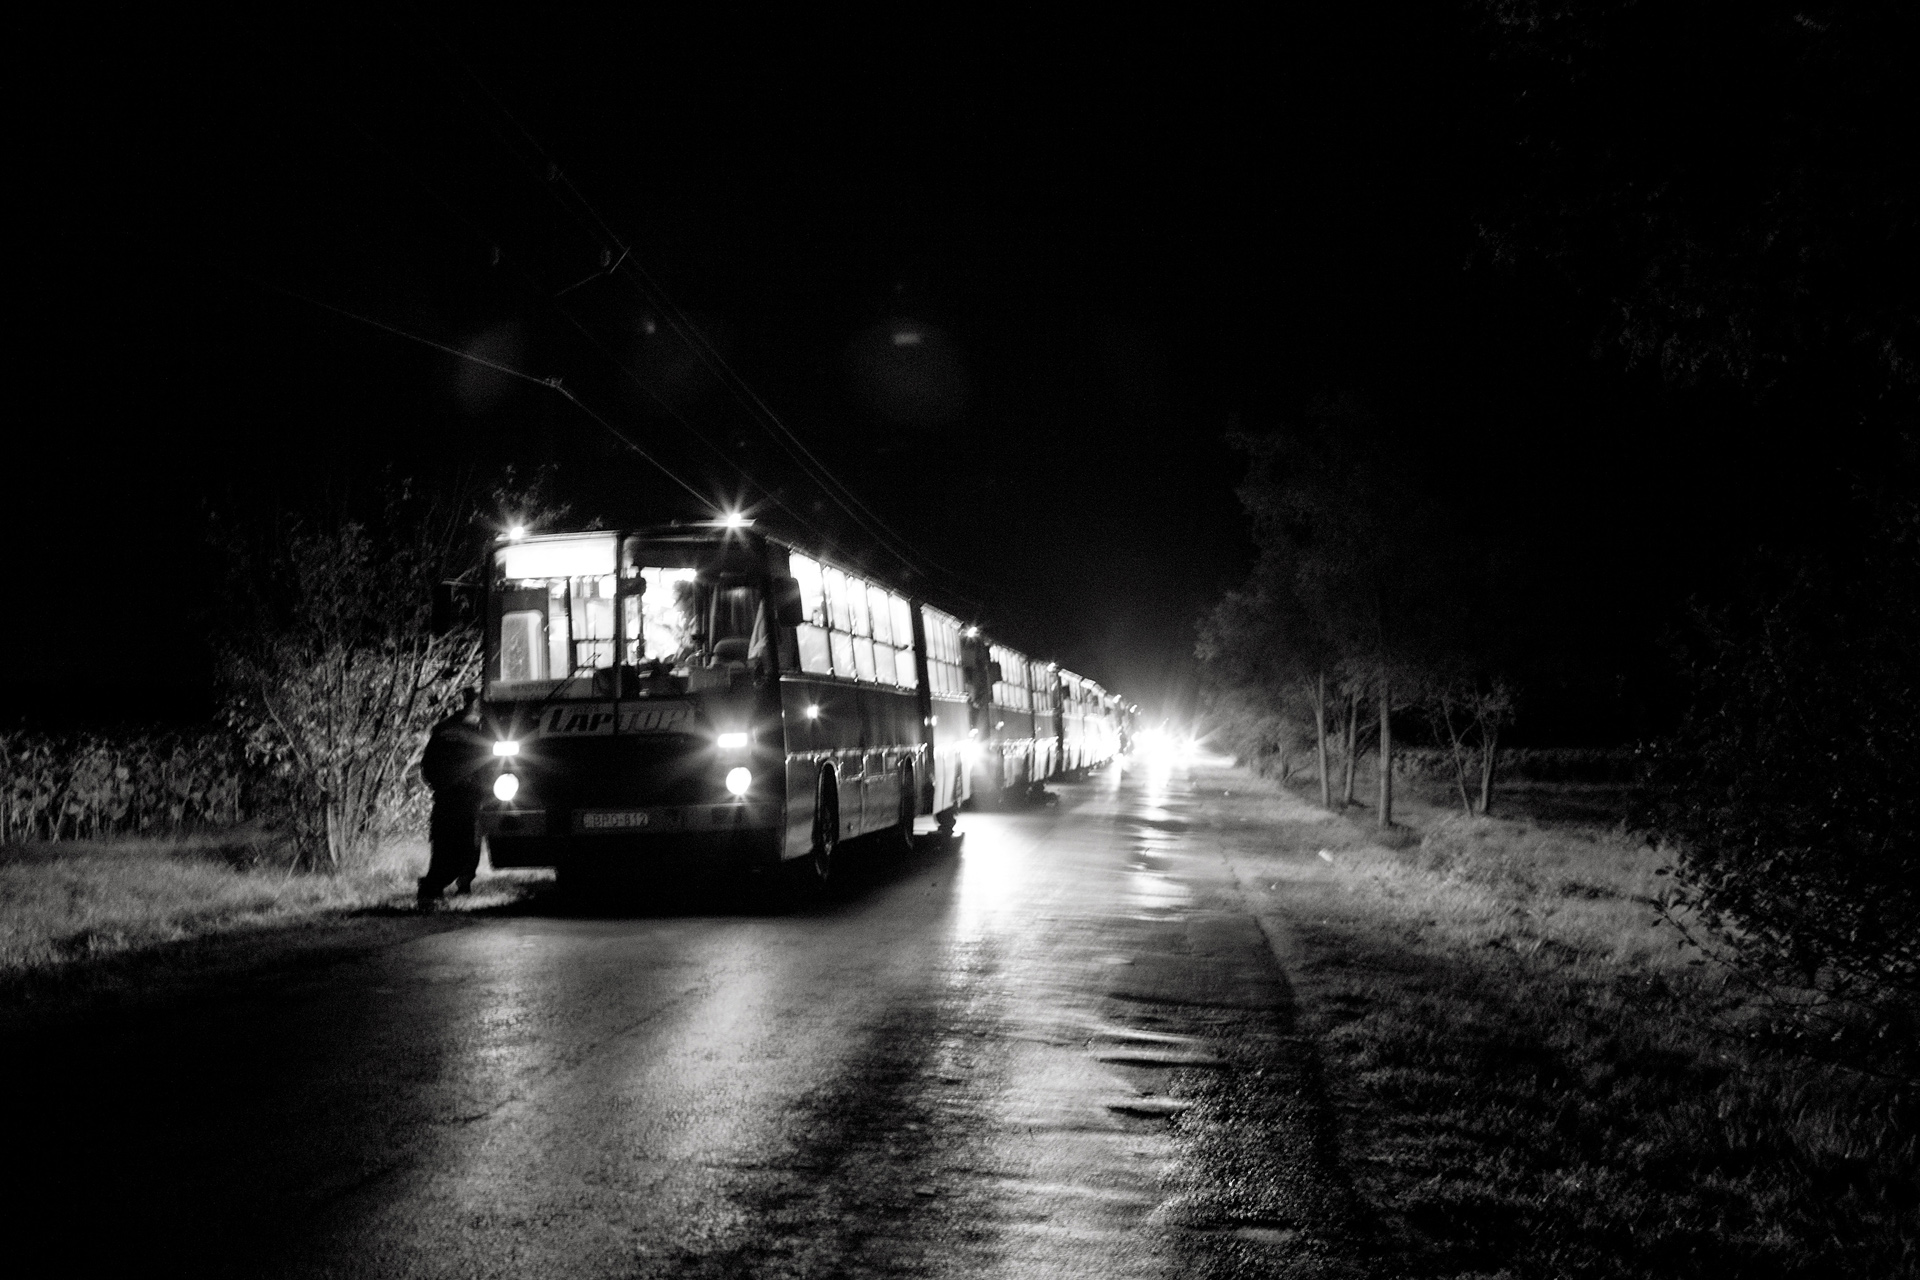 14 September 2015, Röszke, Hungary.
Busses carrying refugees arrived in Hungary from Serbia on the 14-09-2015 wait for a train to - assumingly - take them to the Austrian border. Many people had to stay in the busses for over 4 hours. Hungarian authorities have put fences on the common border with Serbia in to reestablish control on the migration movement since a tightening law passed by the right-wing Hungarian government takes effect this midnight.